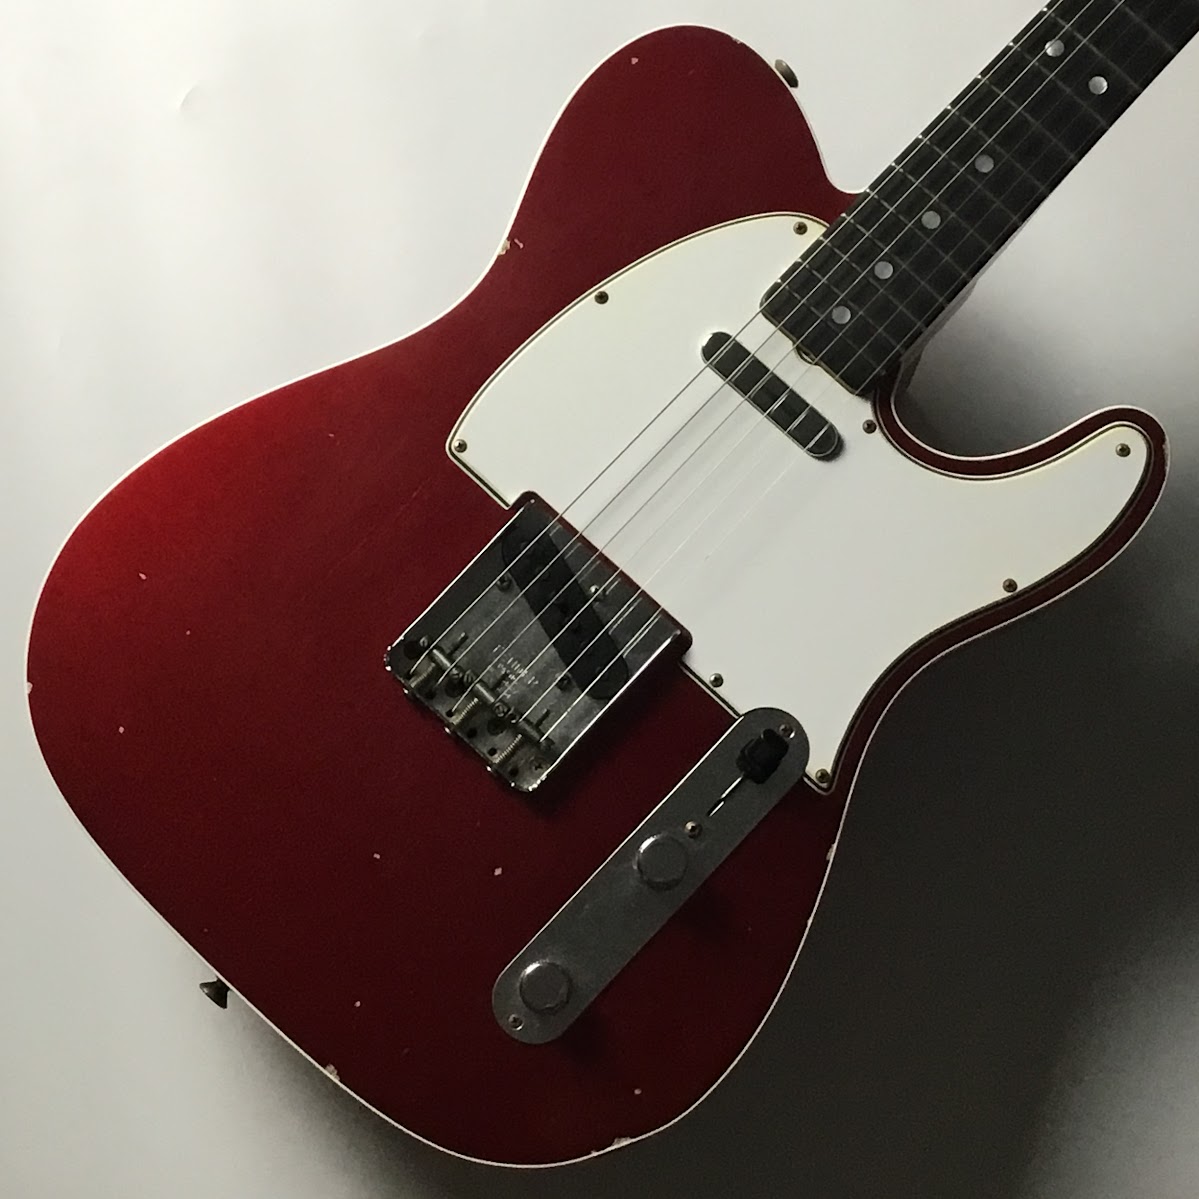 Fender CustomshopEarly 67 Telecaster Custom JRN Candy Apple Red by Ron Thorn